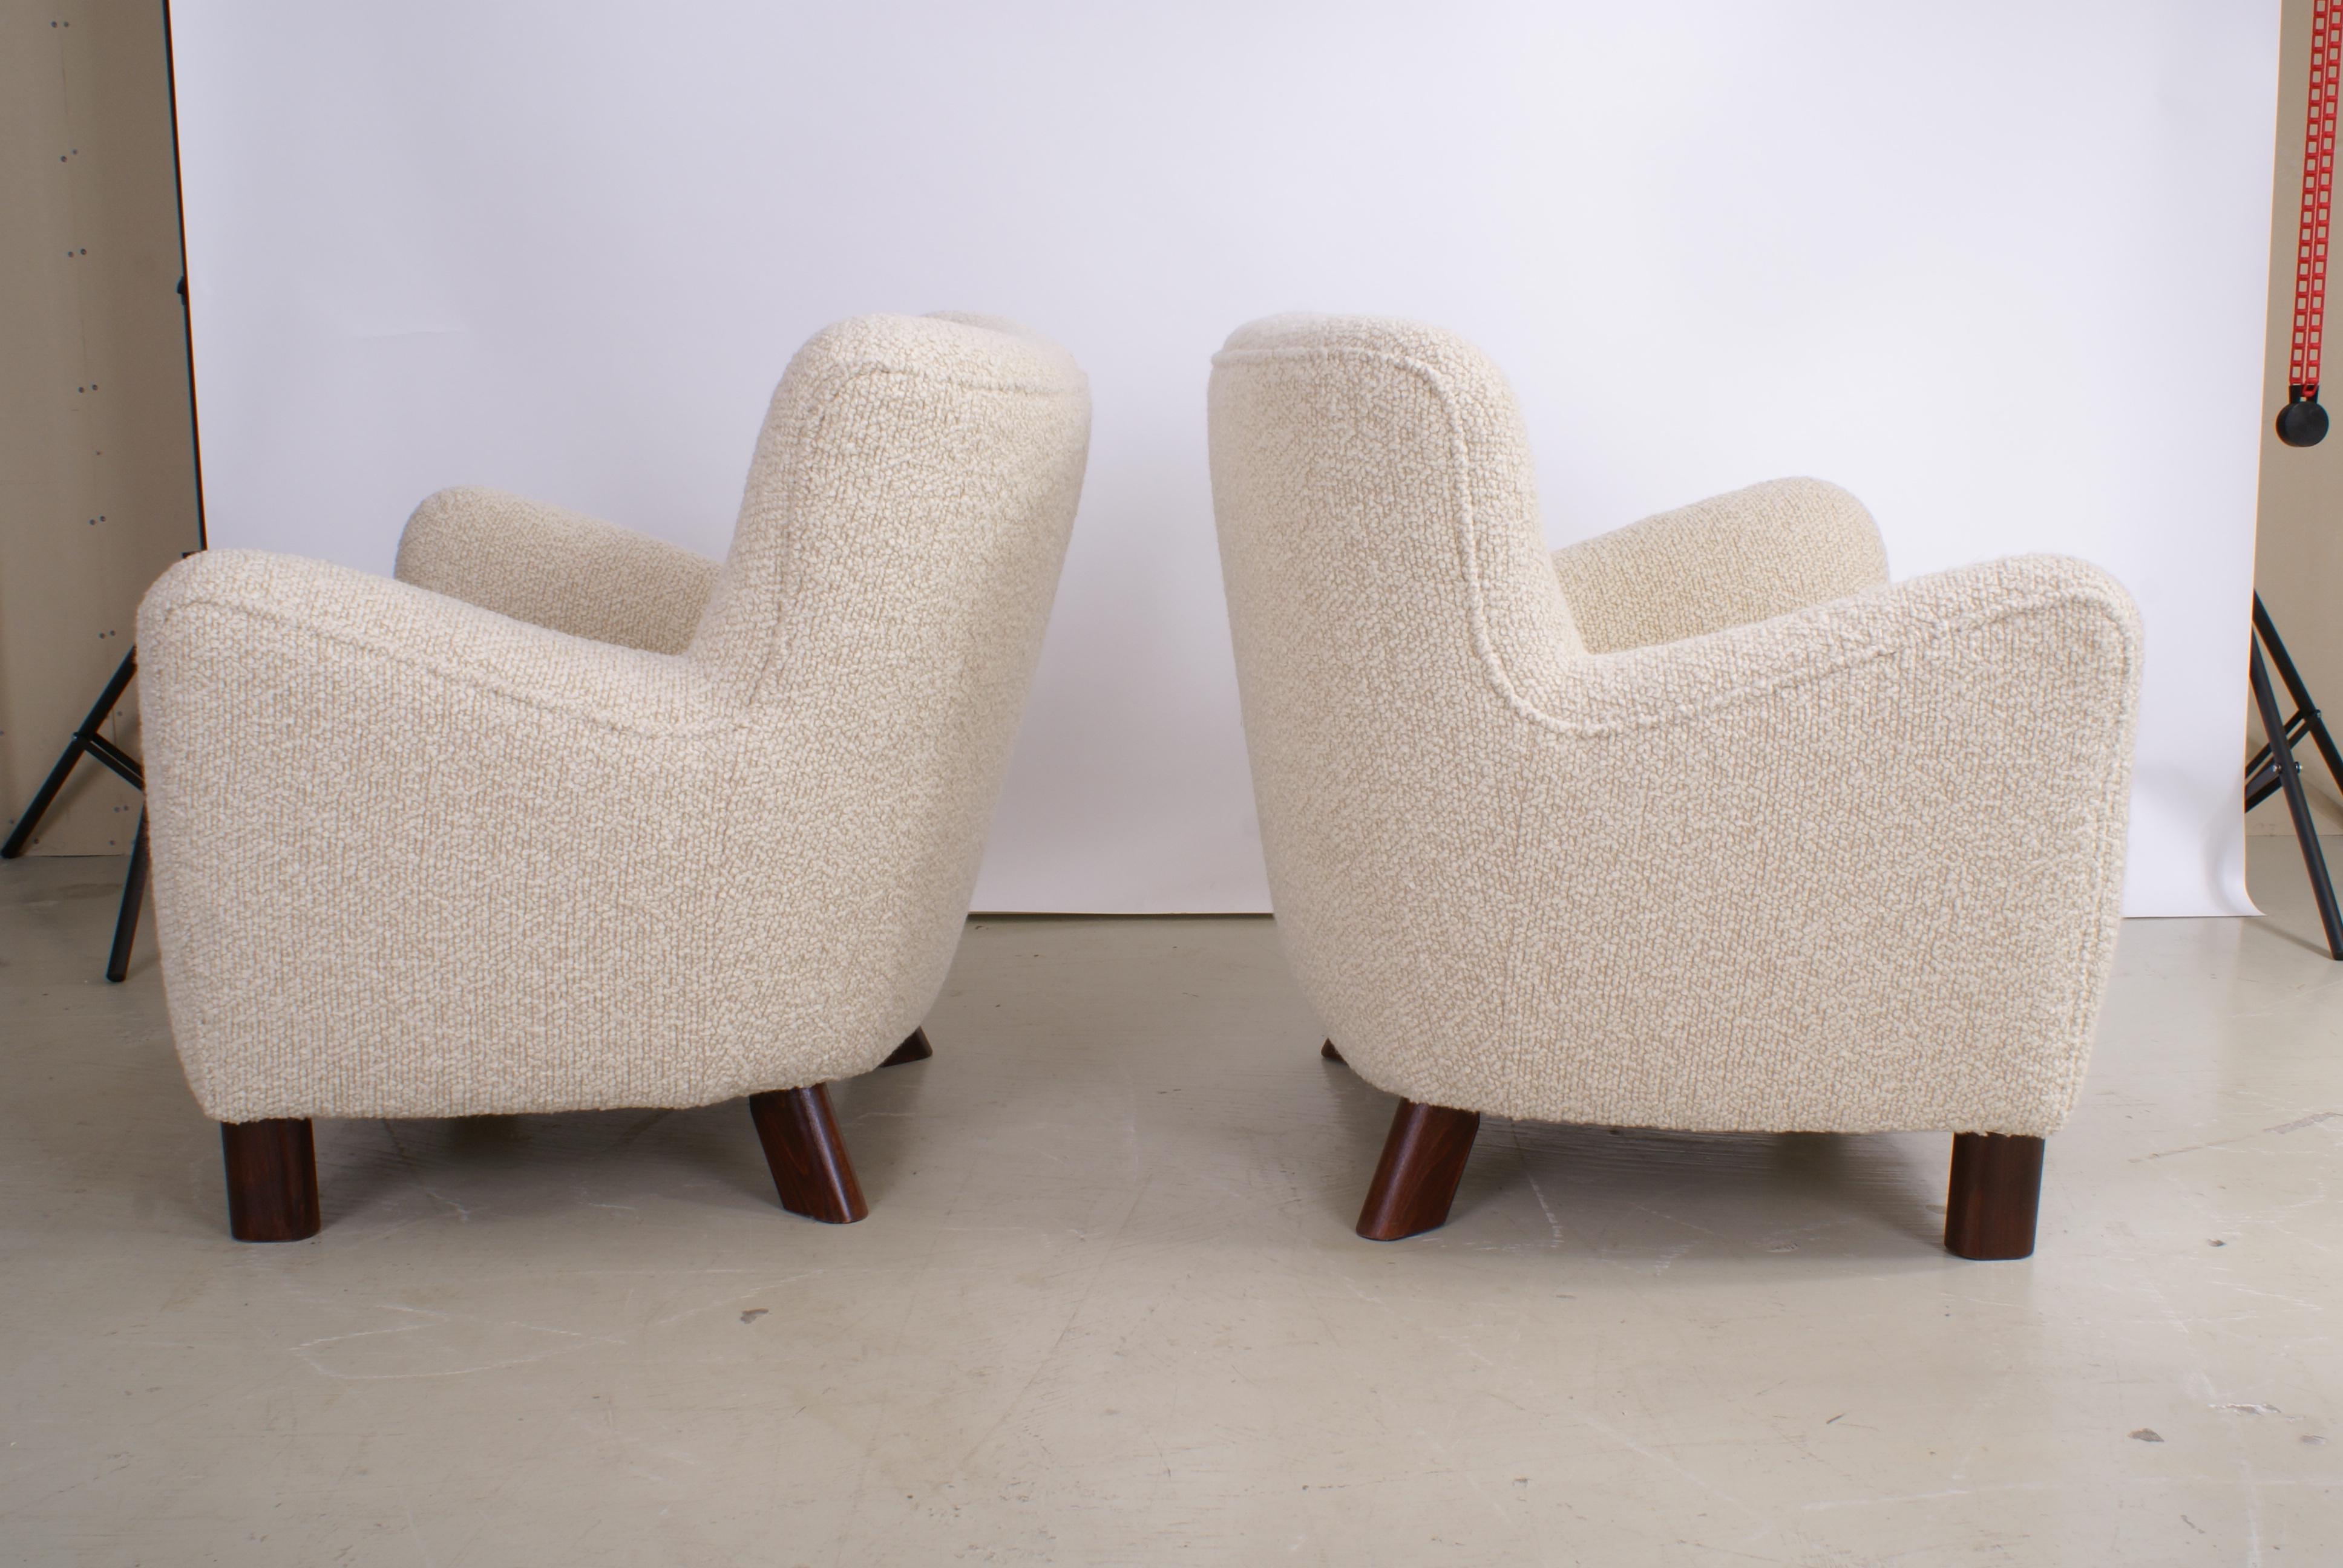 Pair of Fritz Hansen easy chairs, model 1669, circa 1930s.

Sculptural model re-upholstered in wool, legs of stained beech. All work carried out as original with filling in organic materials and bottom finish with nails.

Price is for the pair.